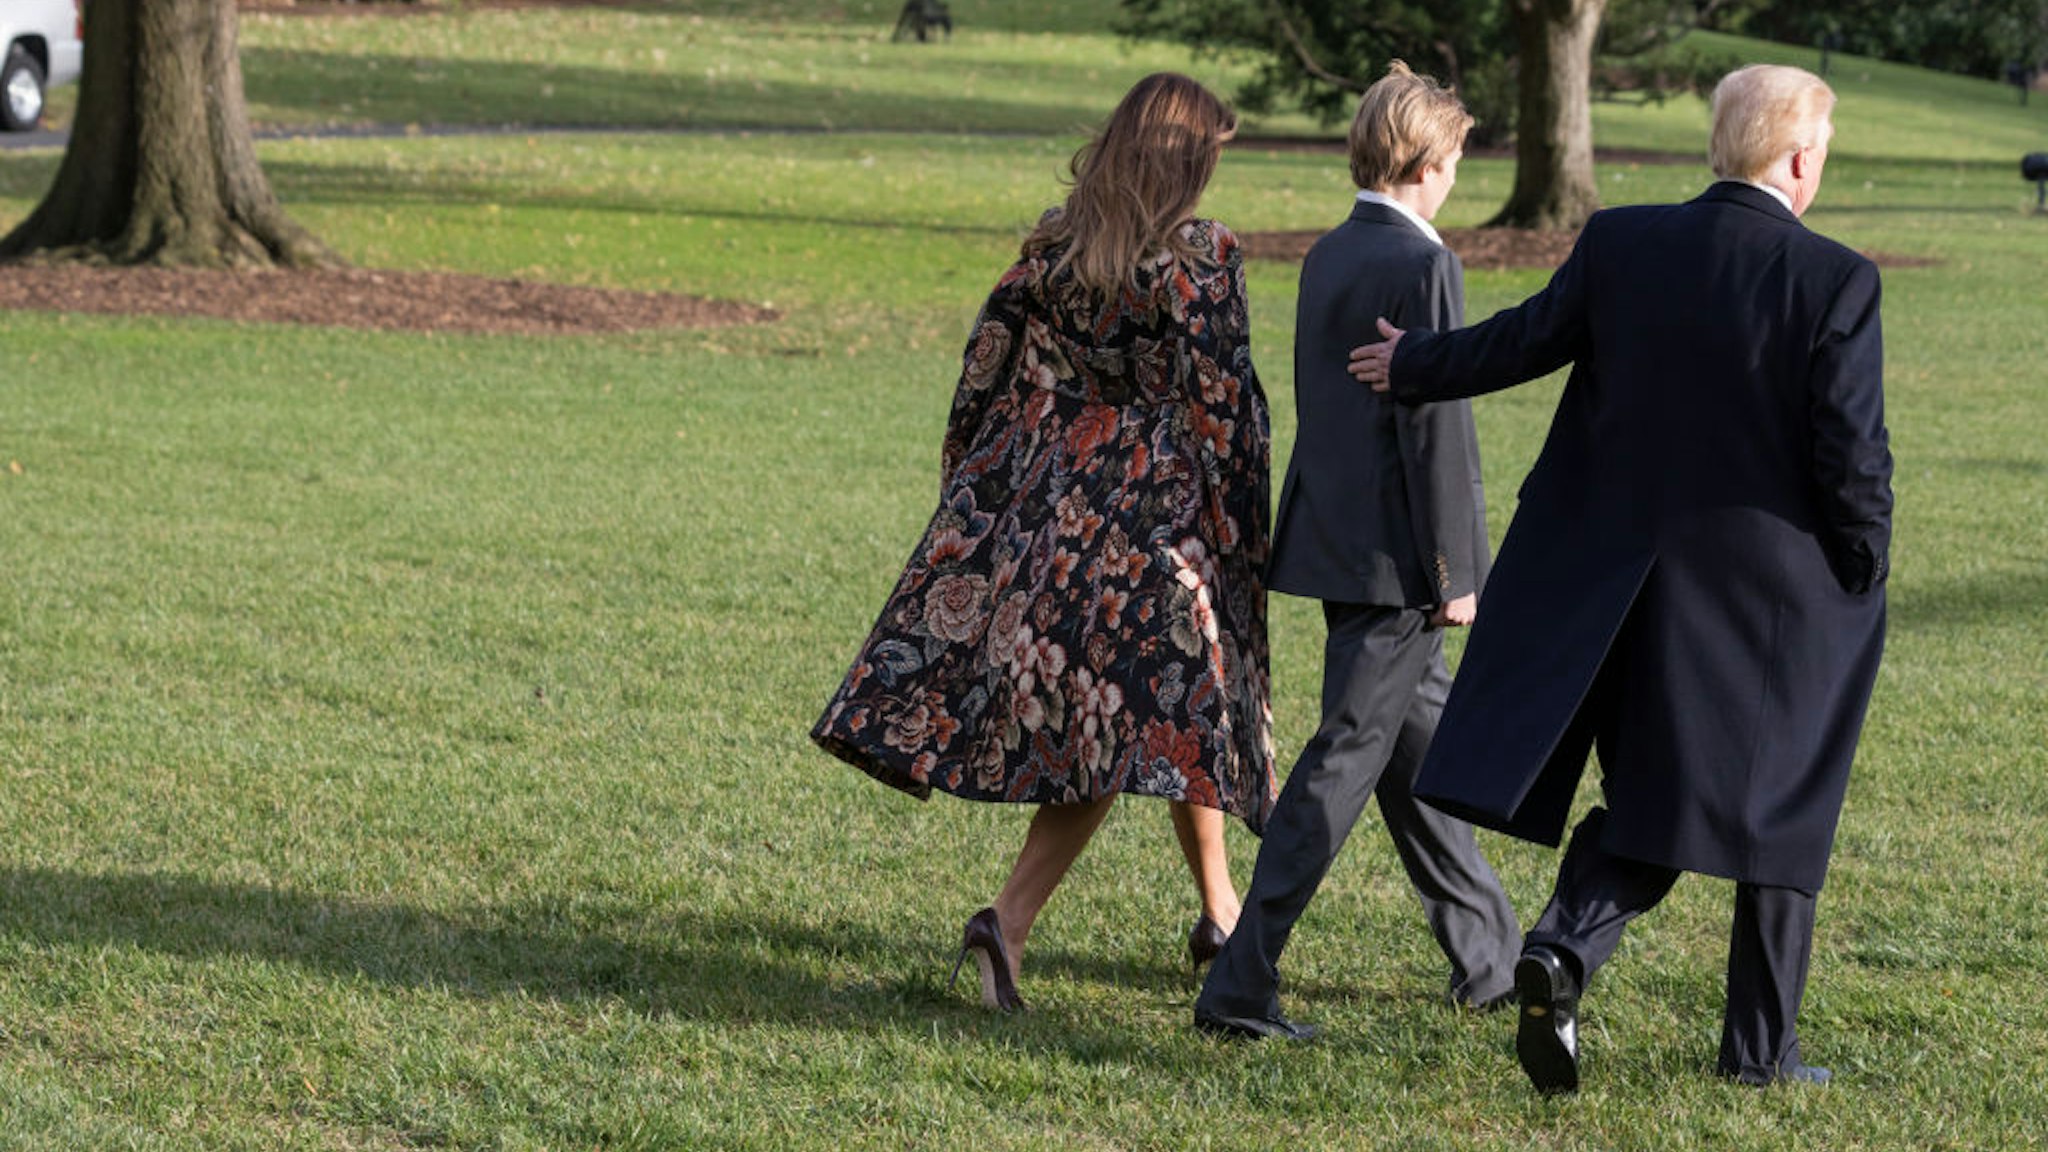 President Donald Trump leaves the White House with First Lady Melania Trump and son Barron Trump, as they depart for the Thanksgiving Holiday from the South Lawn of the White House in Washington, DC, on November 21, 2017.